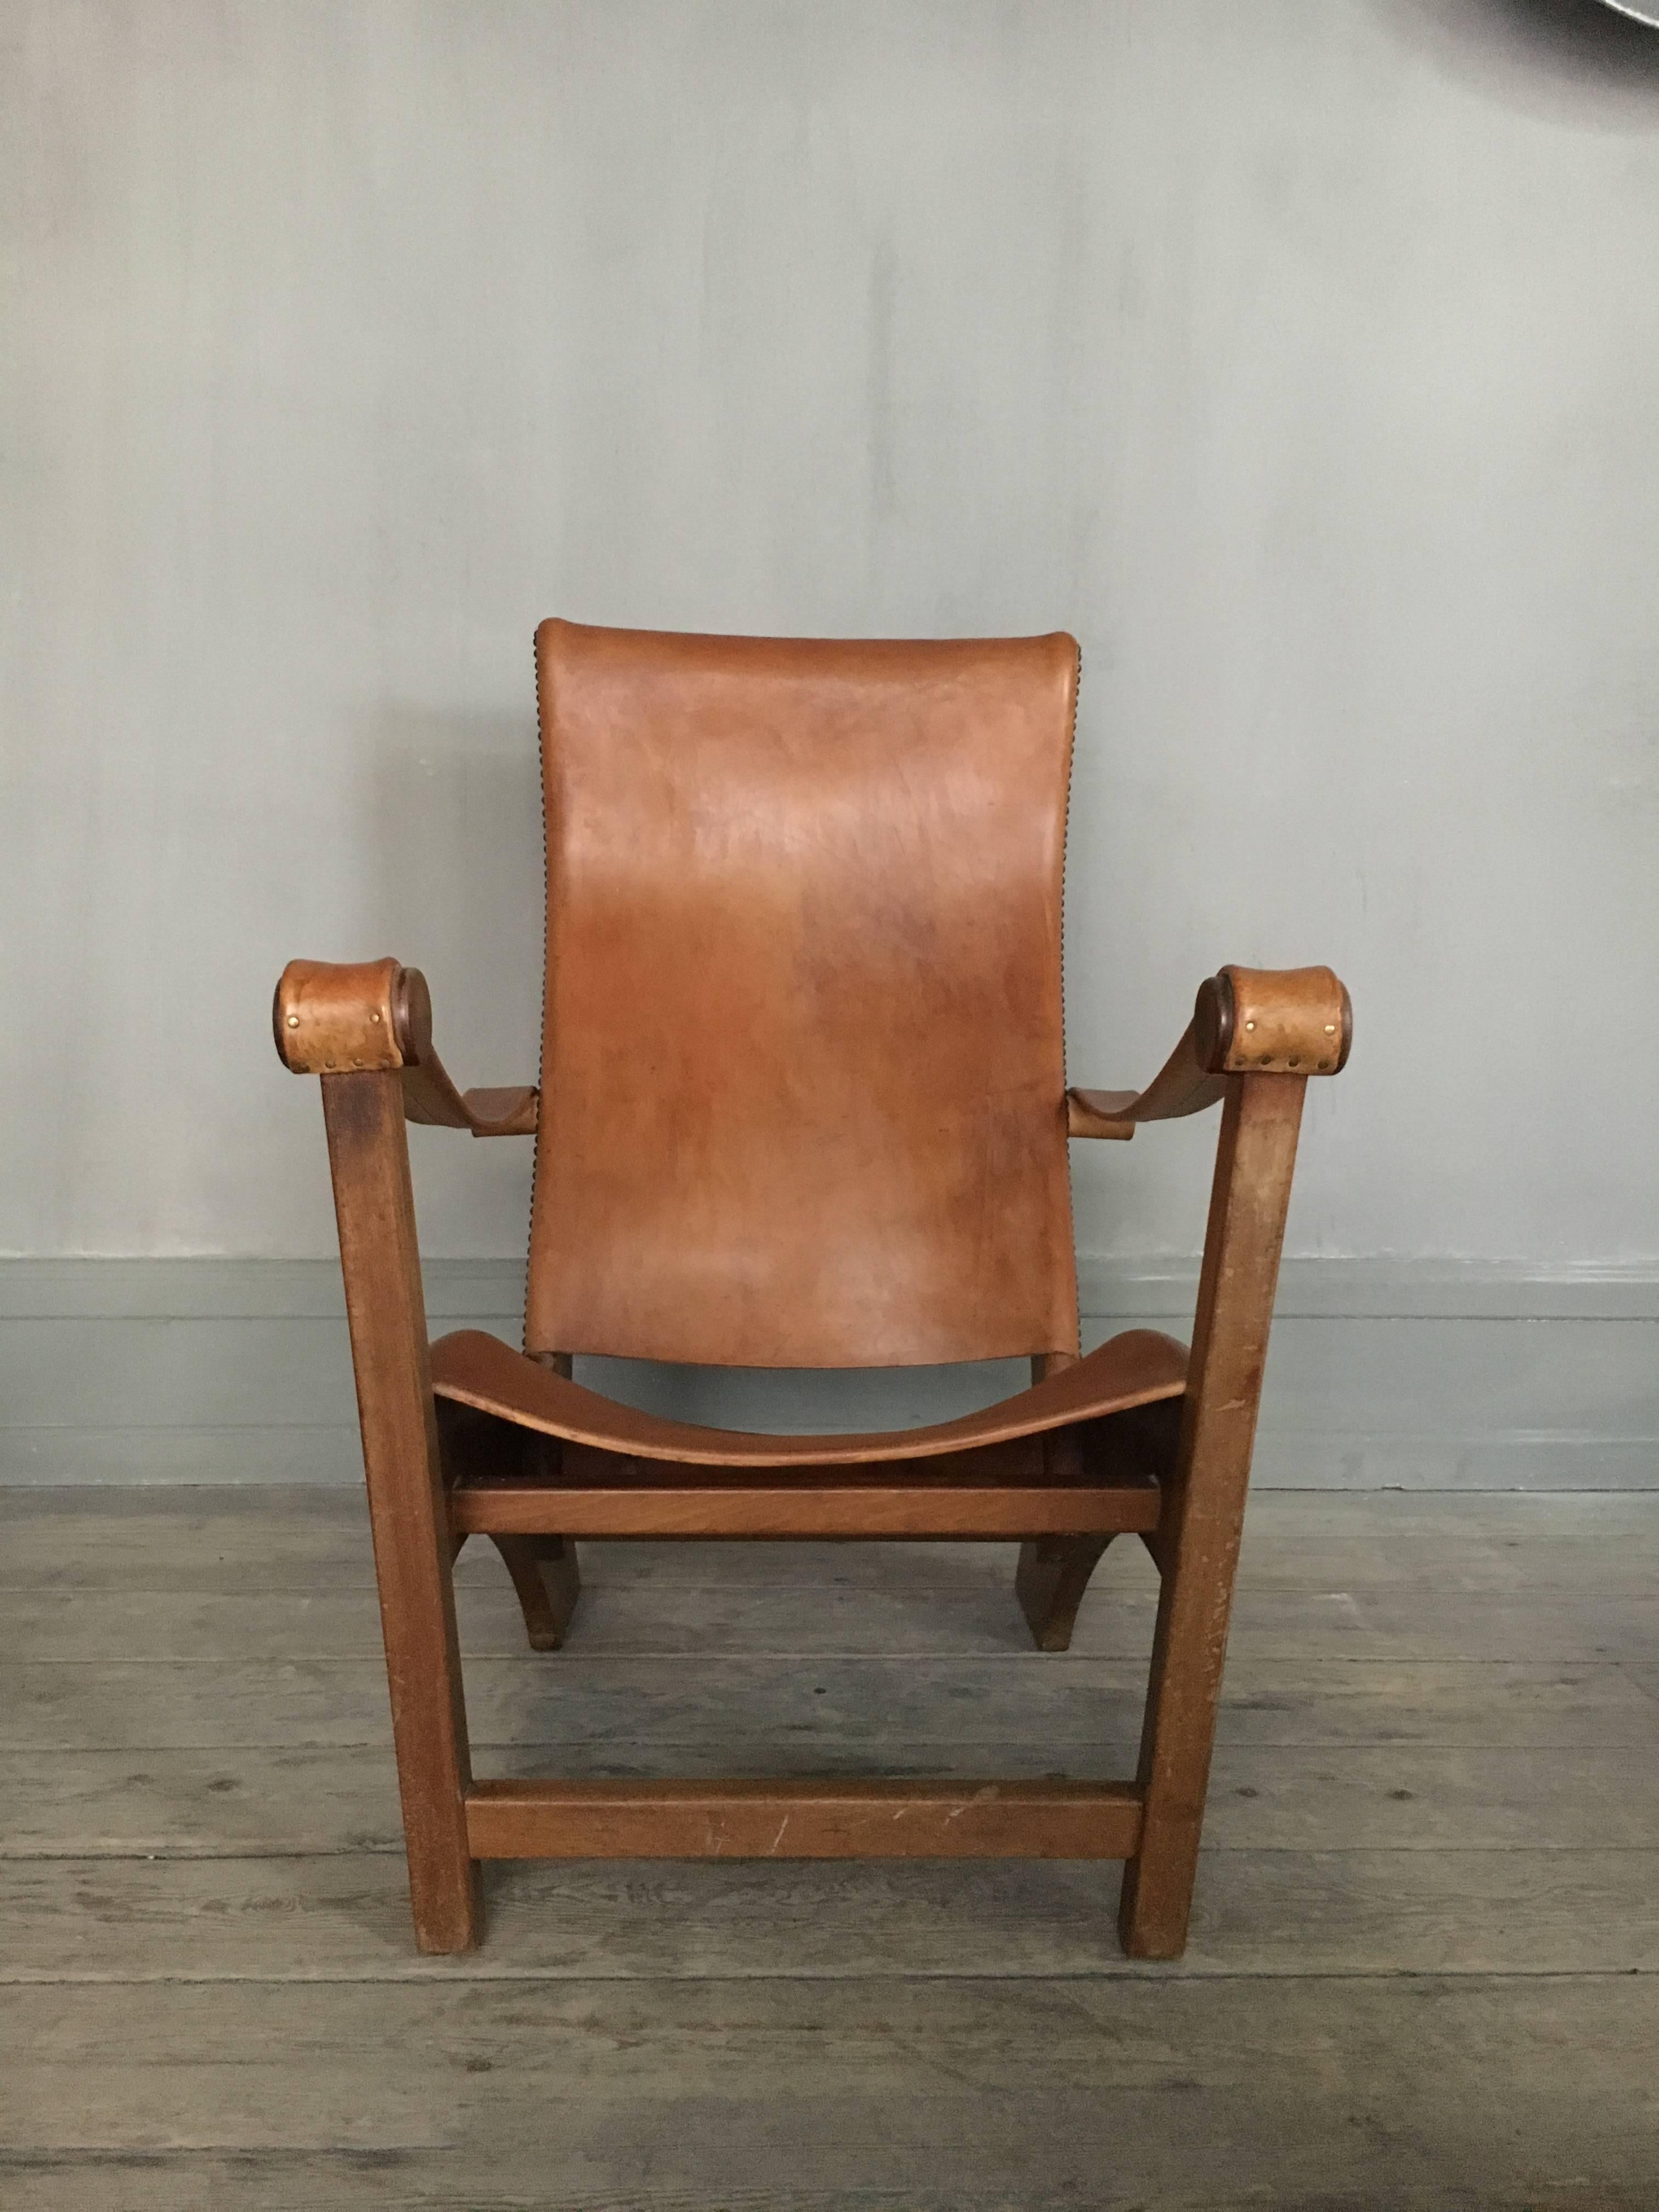 Iconic and rare Danish lounge chair from the 1930s designed by Mogens Voltelen and produced by master cabinetmaker Niels Vodder.
The chair is called the Copenhagen chair; 'Københavner-stolen'. Made of oak, seat, armrests and back mounted with